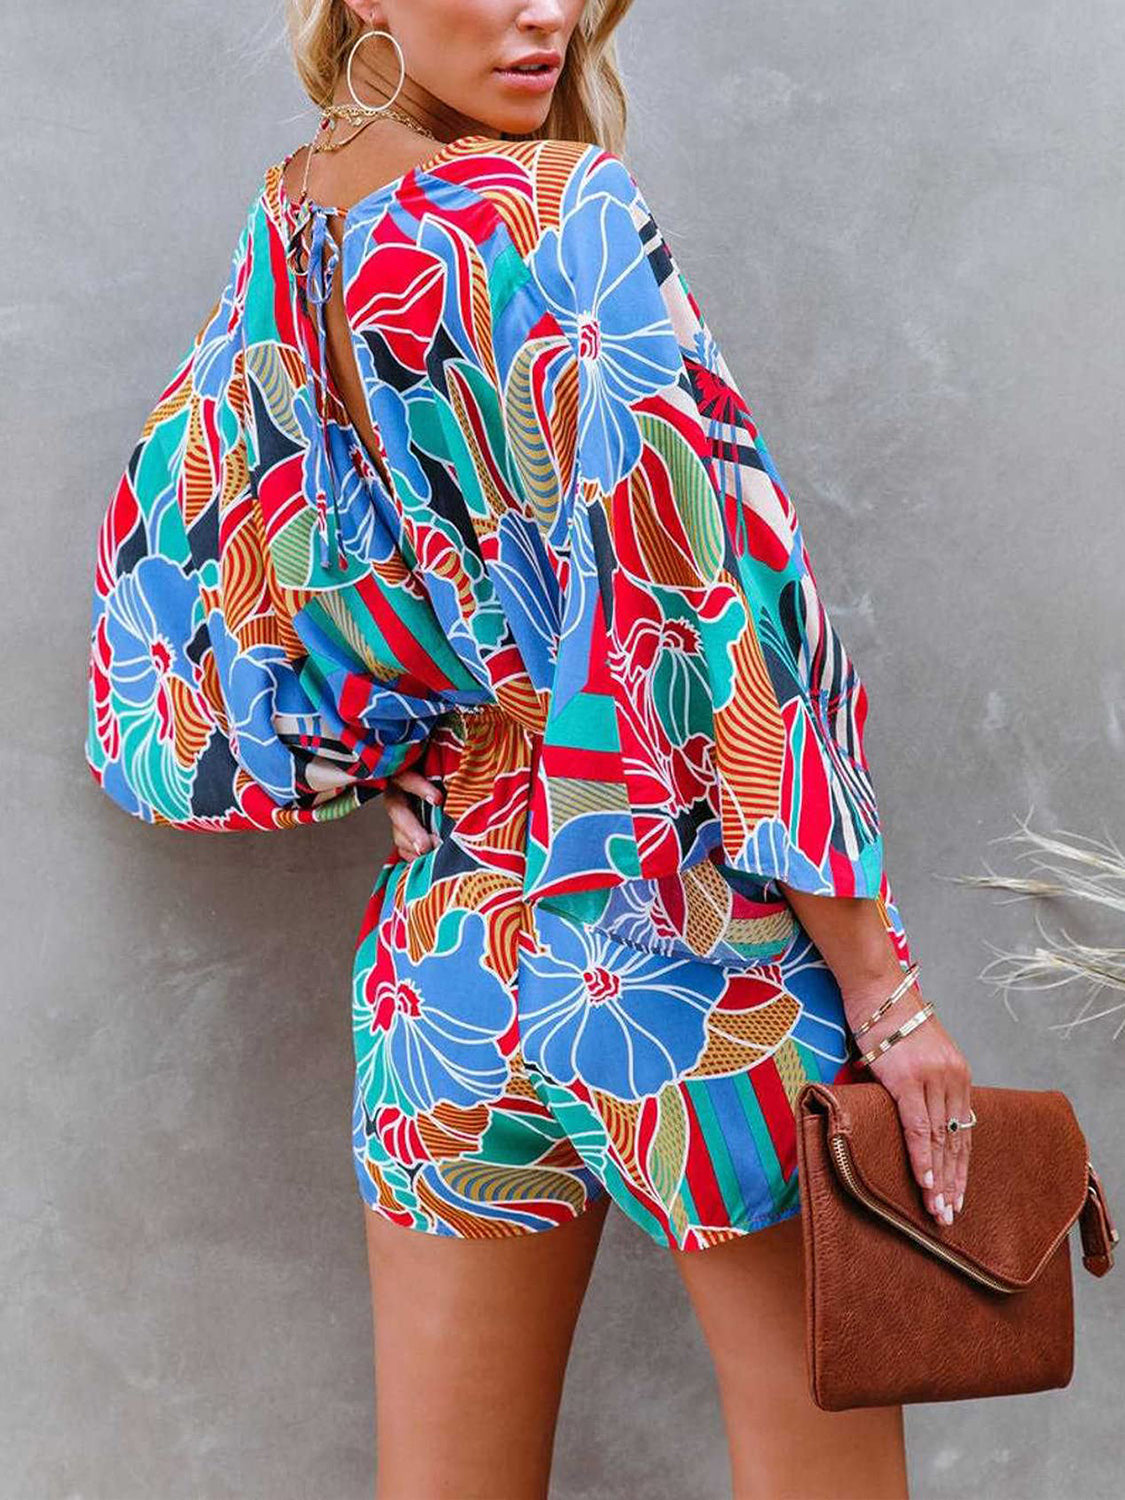 Step into summer with flair in our Tied Printed Kimono Sleeve Romper - perfect for any occasion with a striking, adjustable design